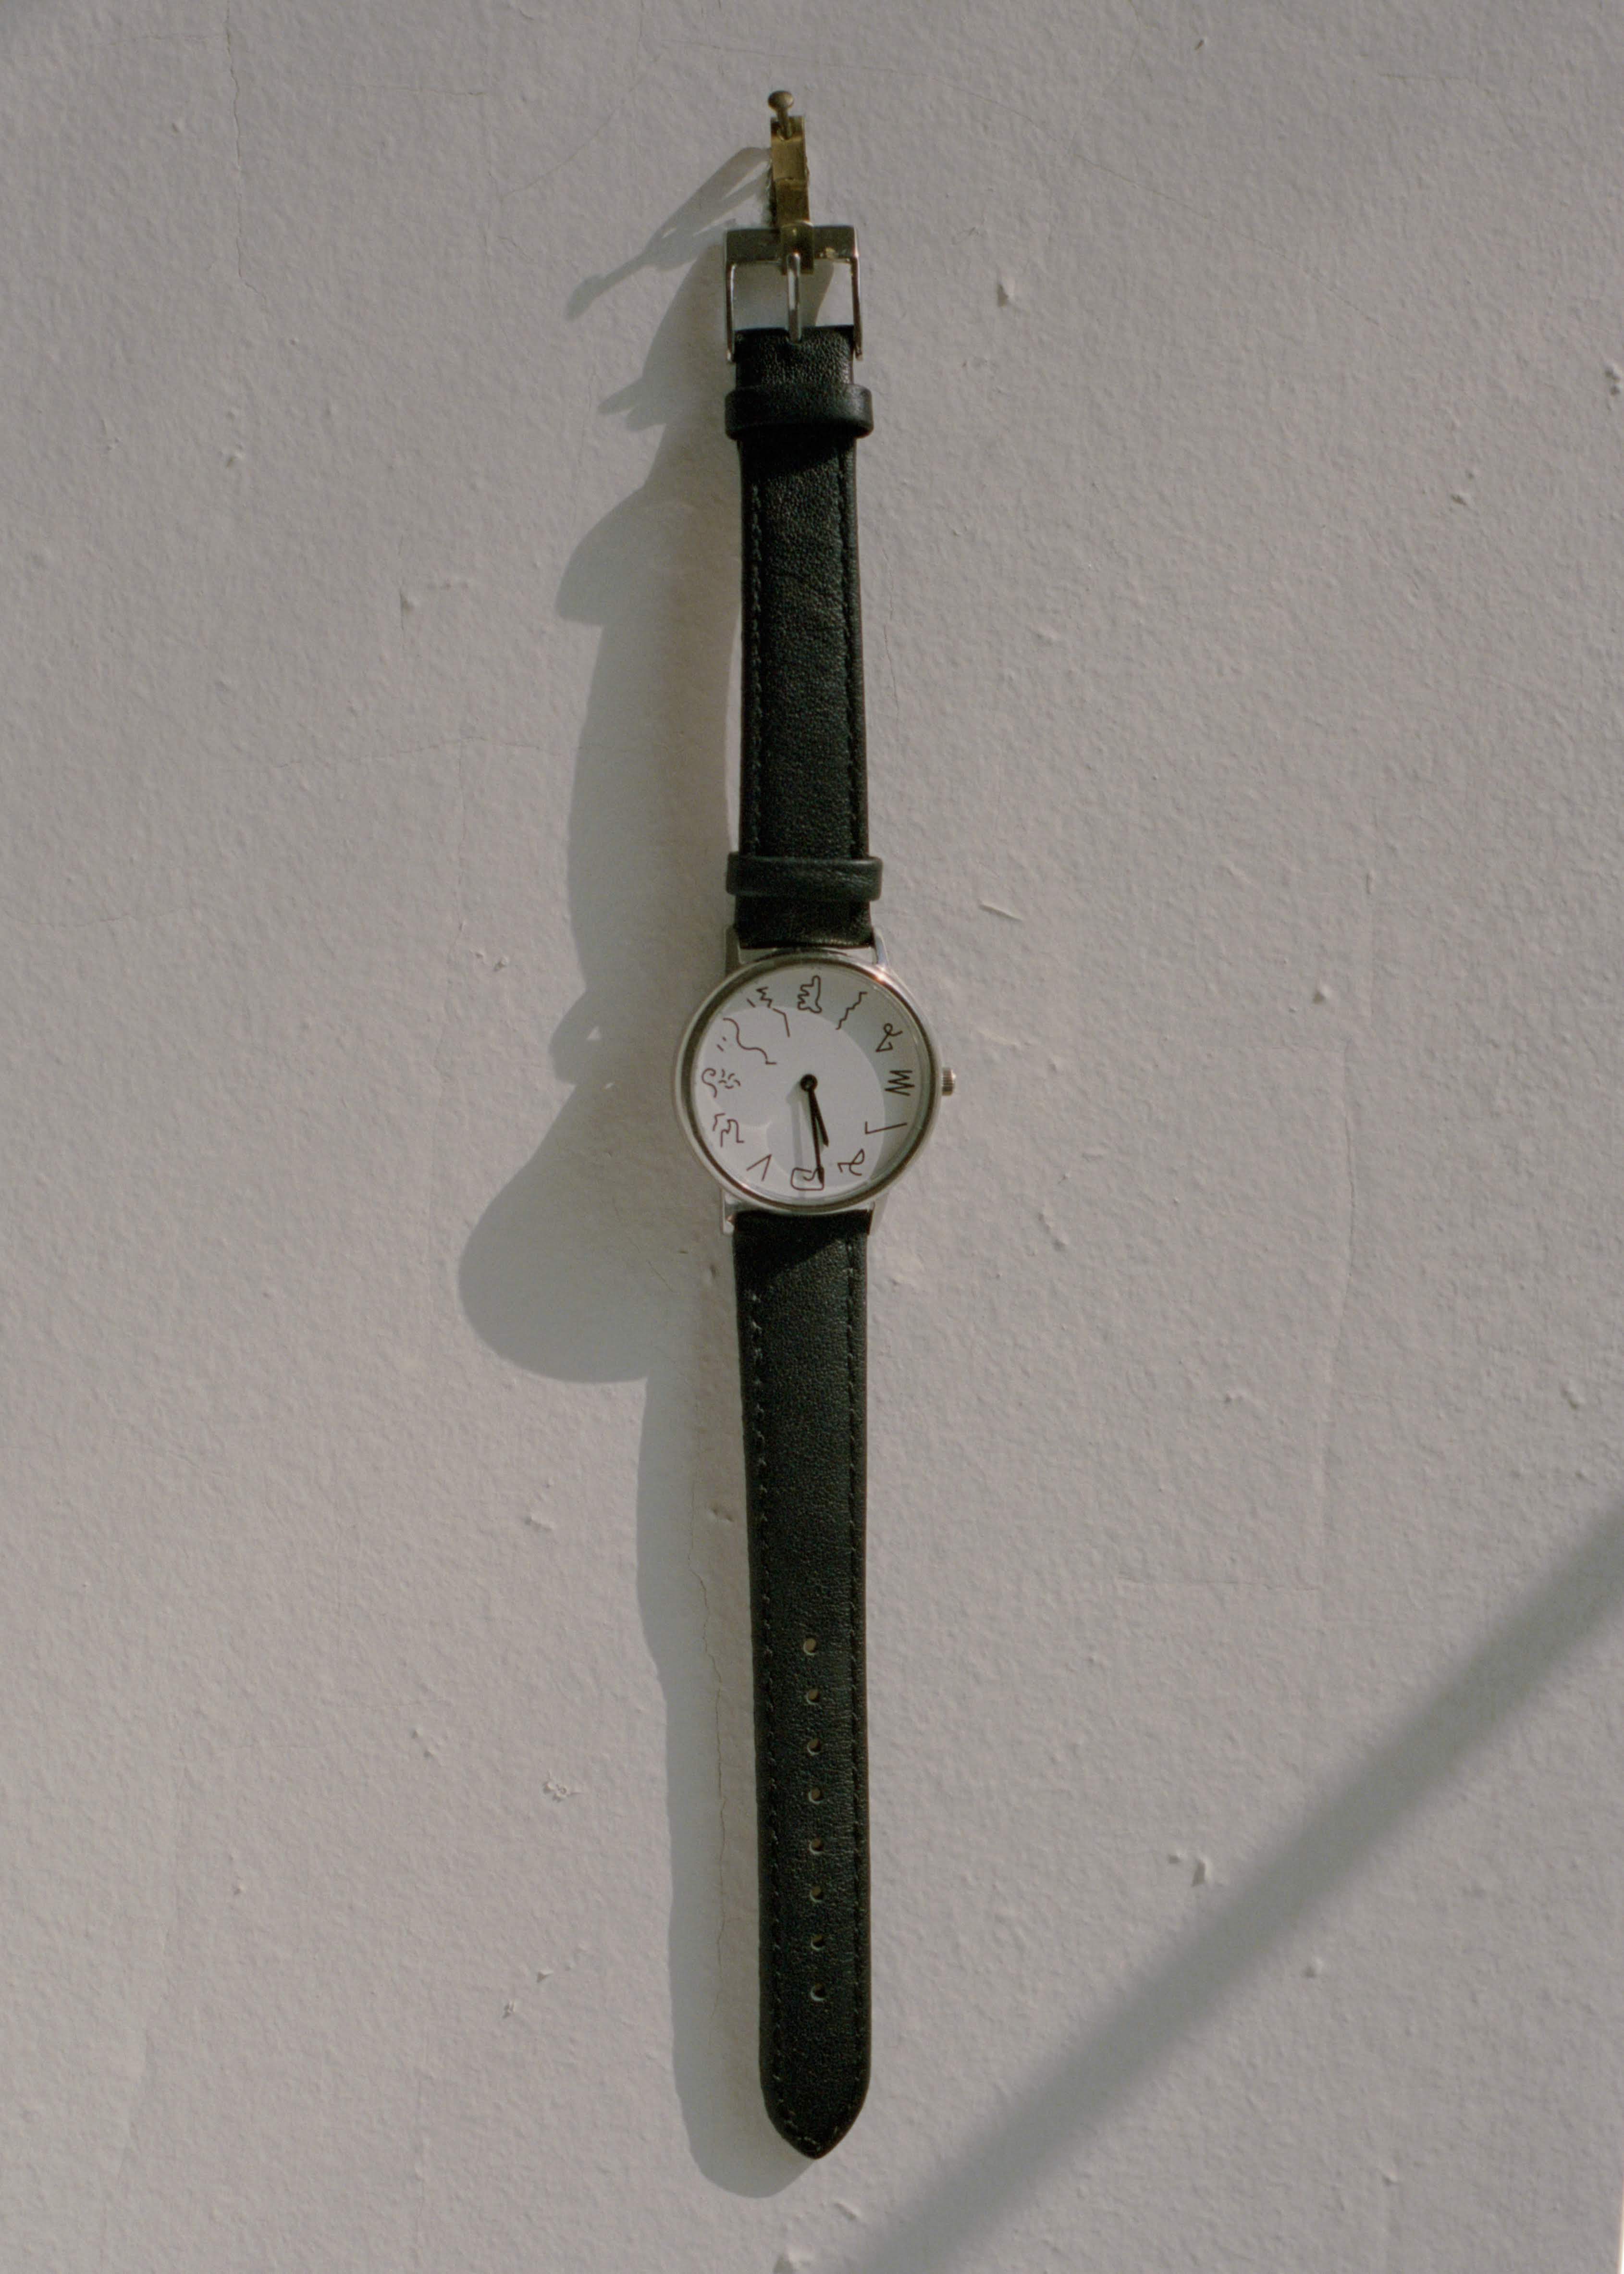 watch with squiggle lines instead of numbers hangs on wall